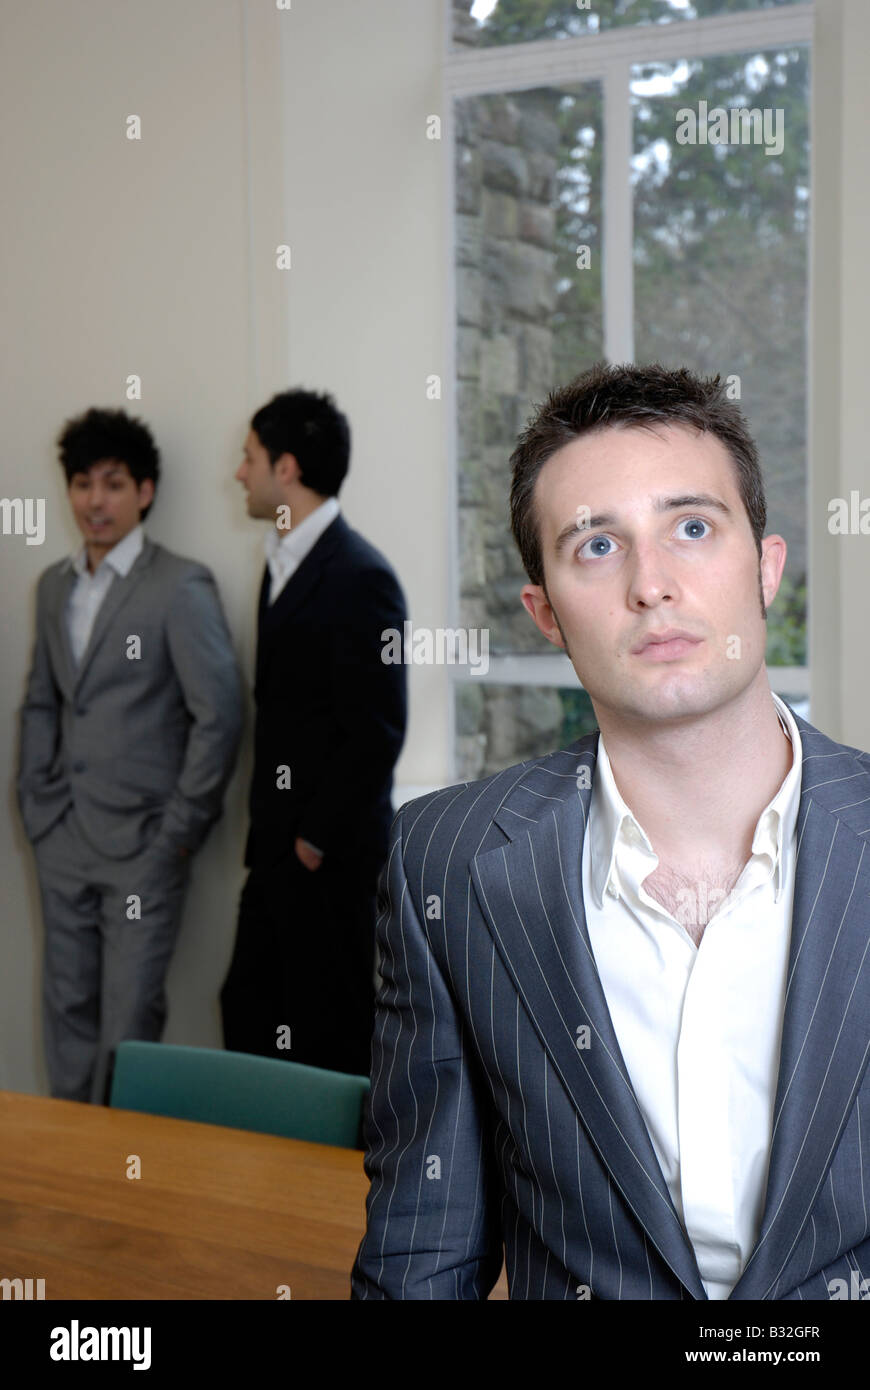 A young business man looking upwards with a thoughtful imaginative expression Stock Photo